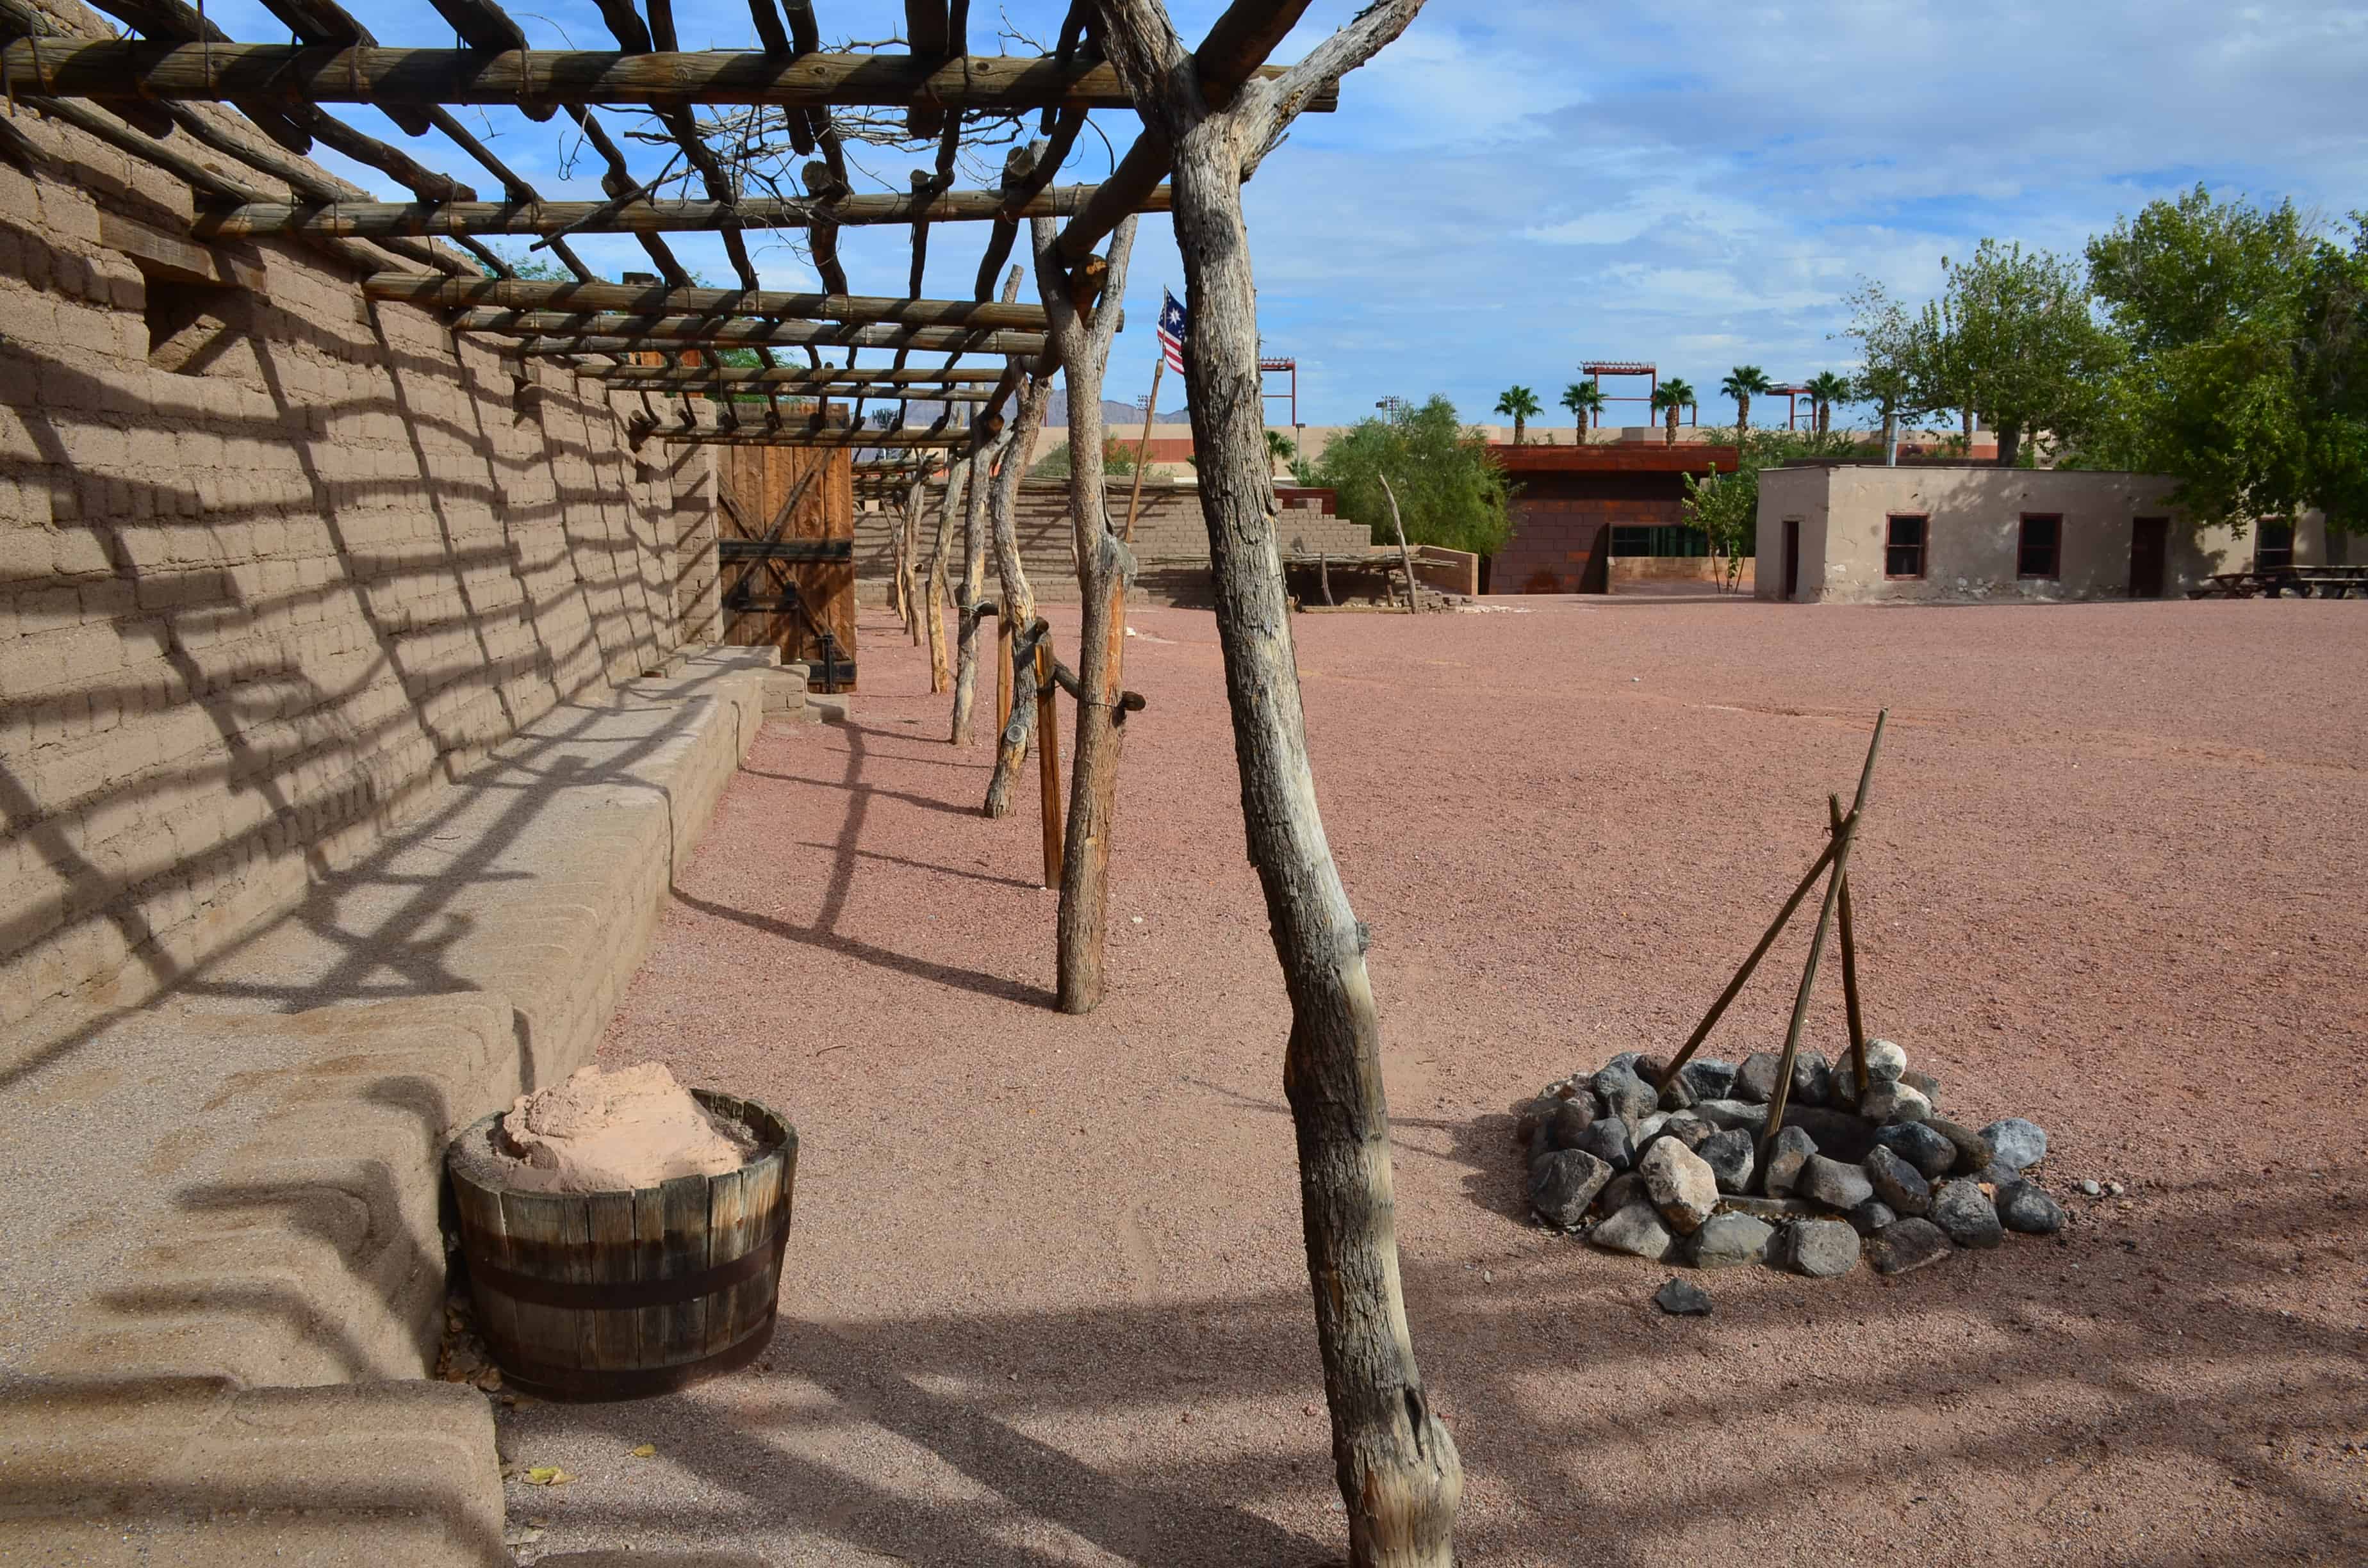 The fort at Old Las Vegas Mormon Fort State Historic Park in Nevada